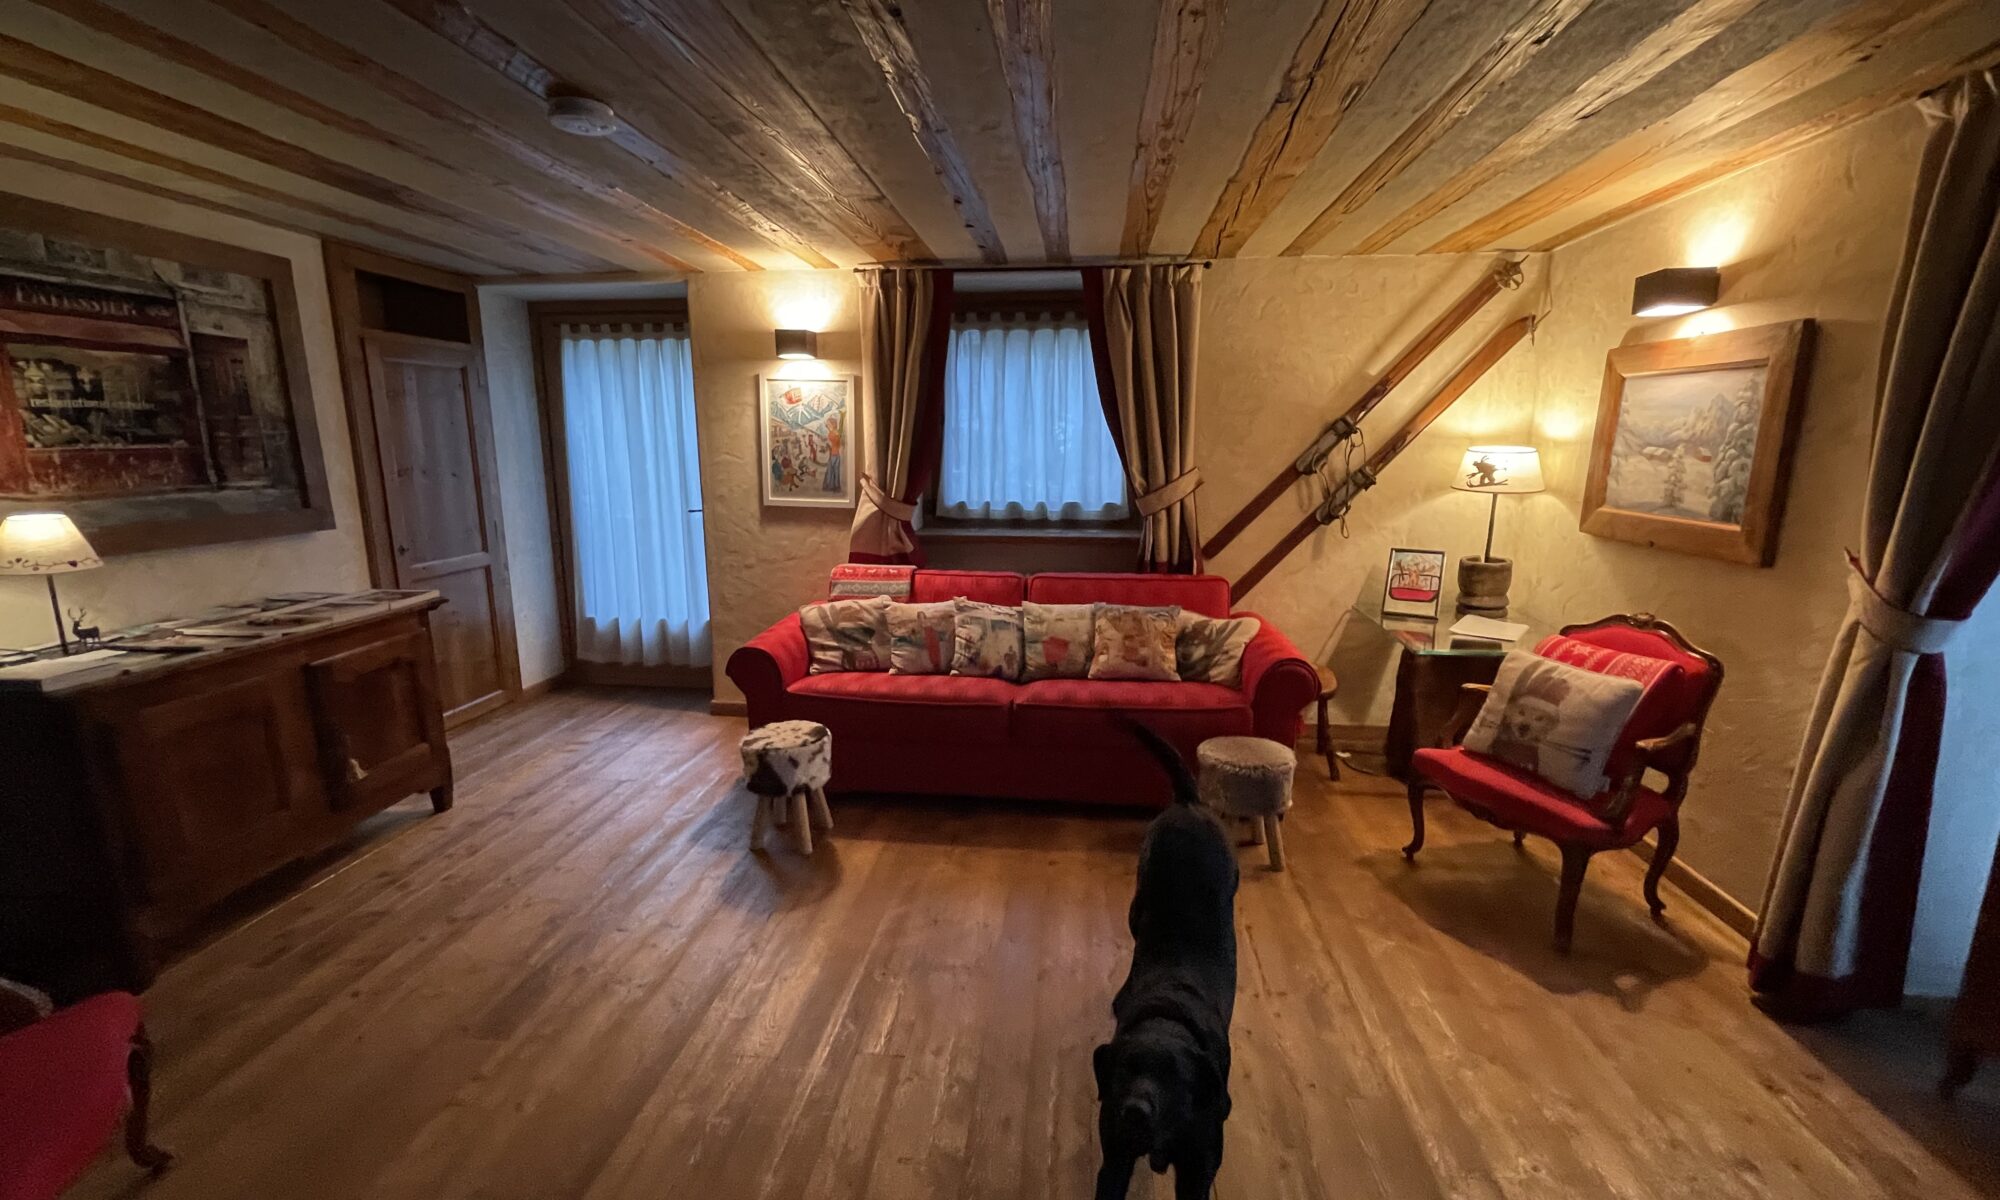 Ozzy at home after a long trip from London to Morgex in the Italian Alps. Getting an European Passport for your Pet to travel to Europe? Not for everyone!